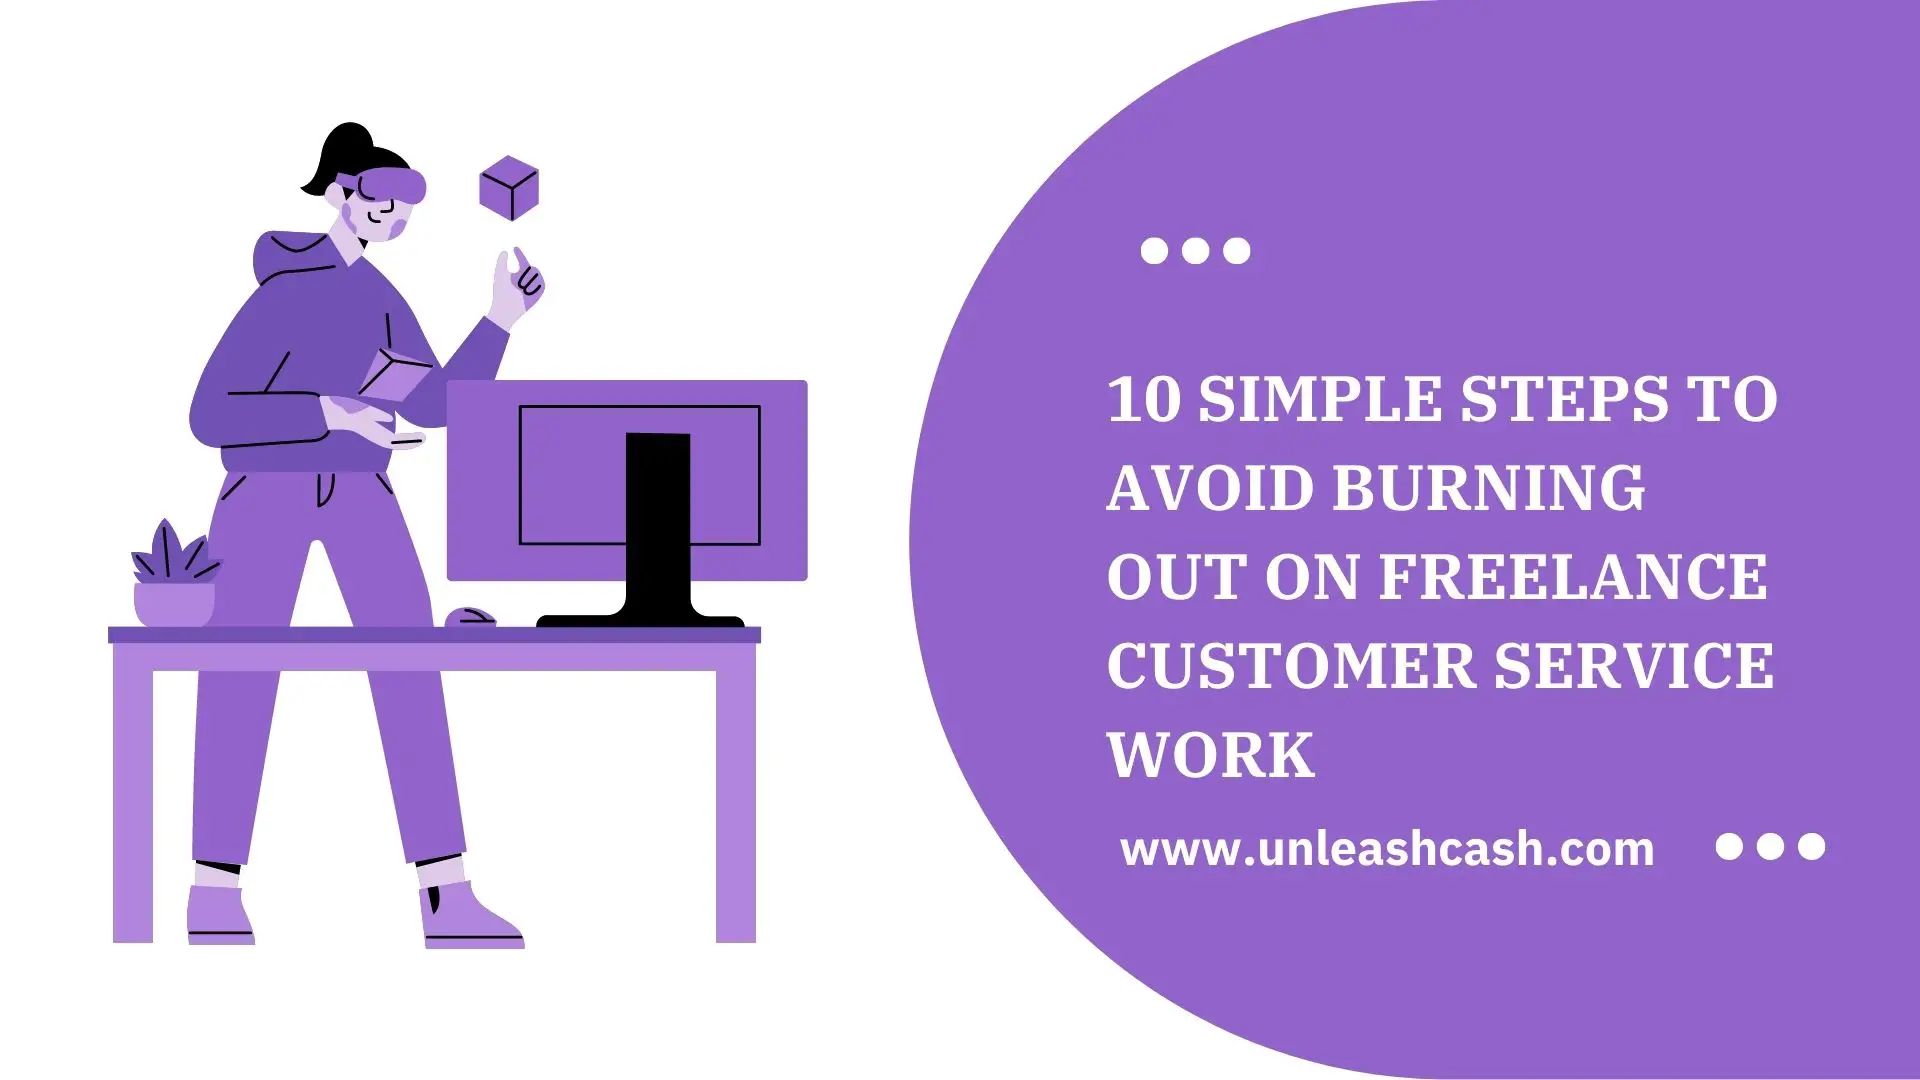 10 Simple Steps To Avoid Burning Out On Freelance Customer Service Work